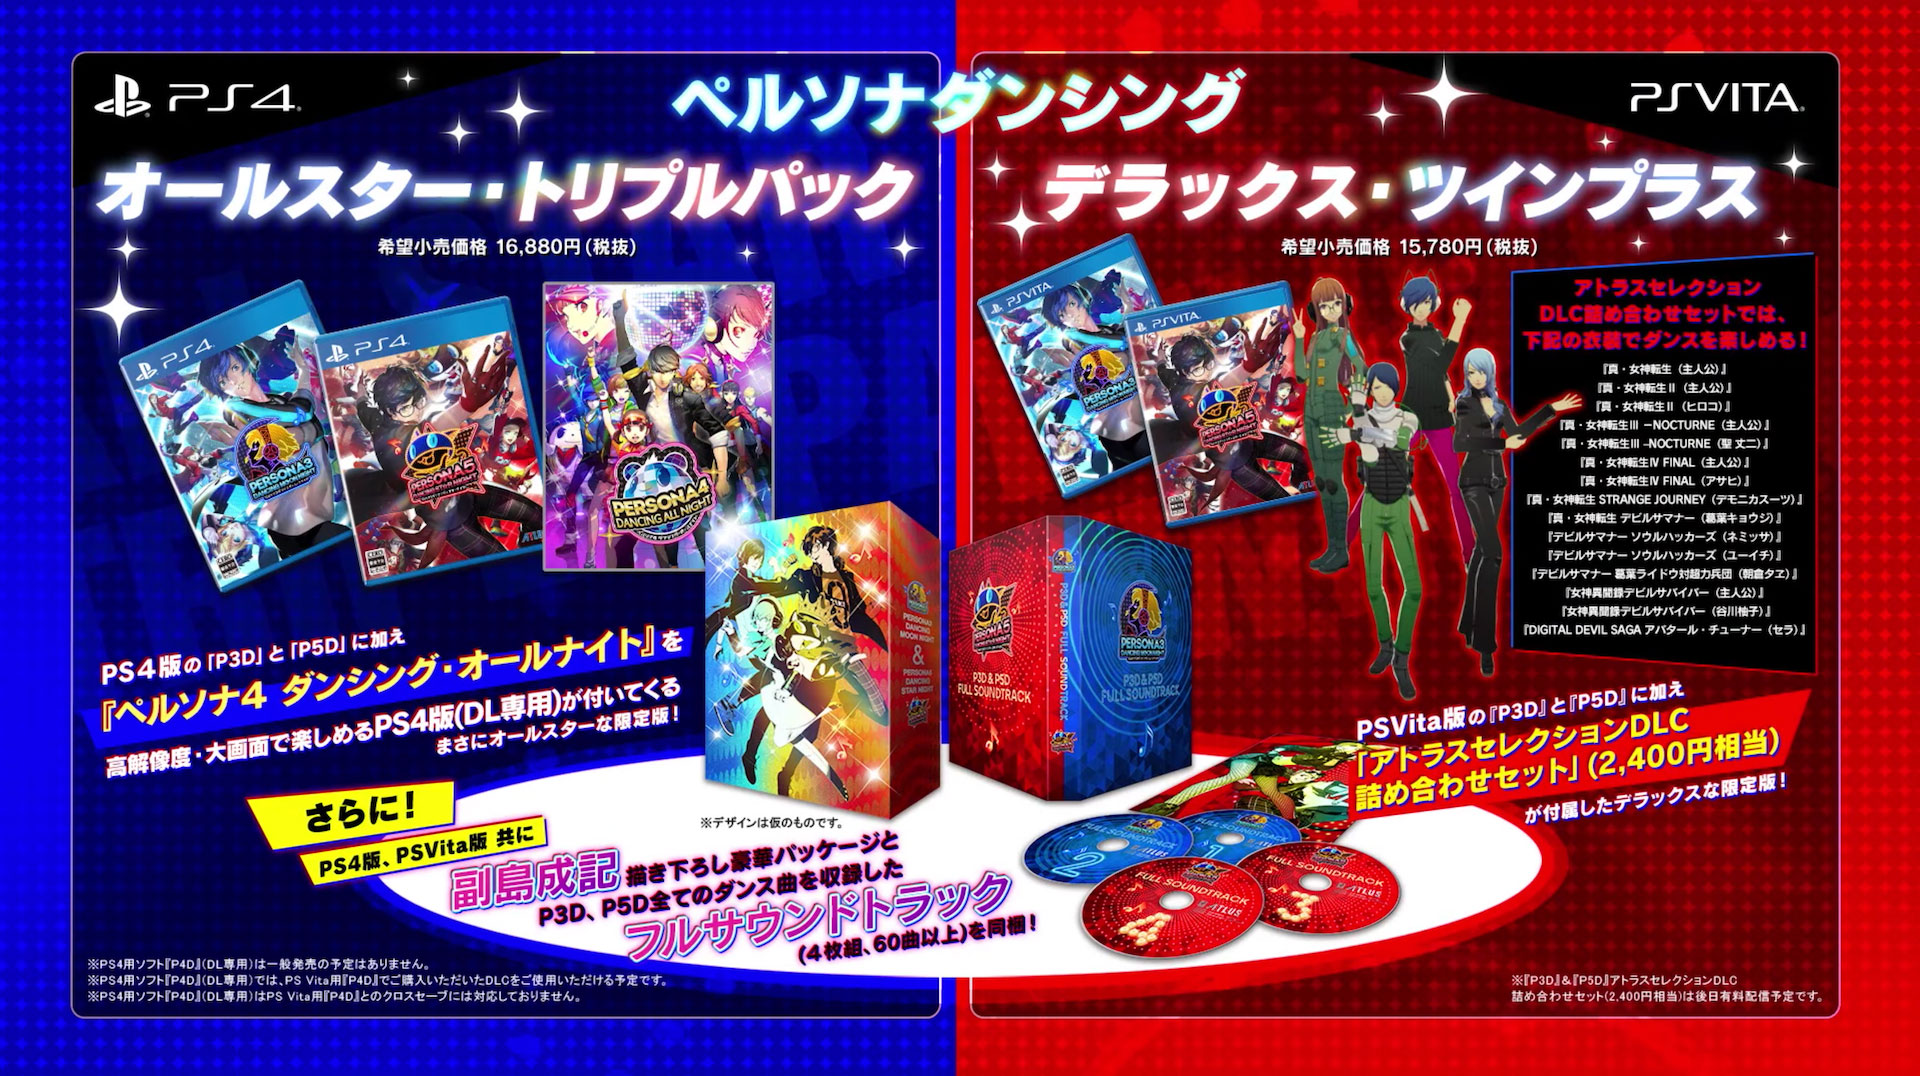 Special multi-packs for Persona 3 Dancing Moon Night and Persona 5 Dancing Star Night